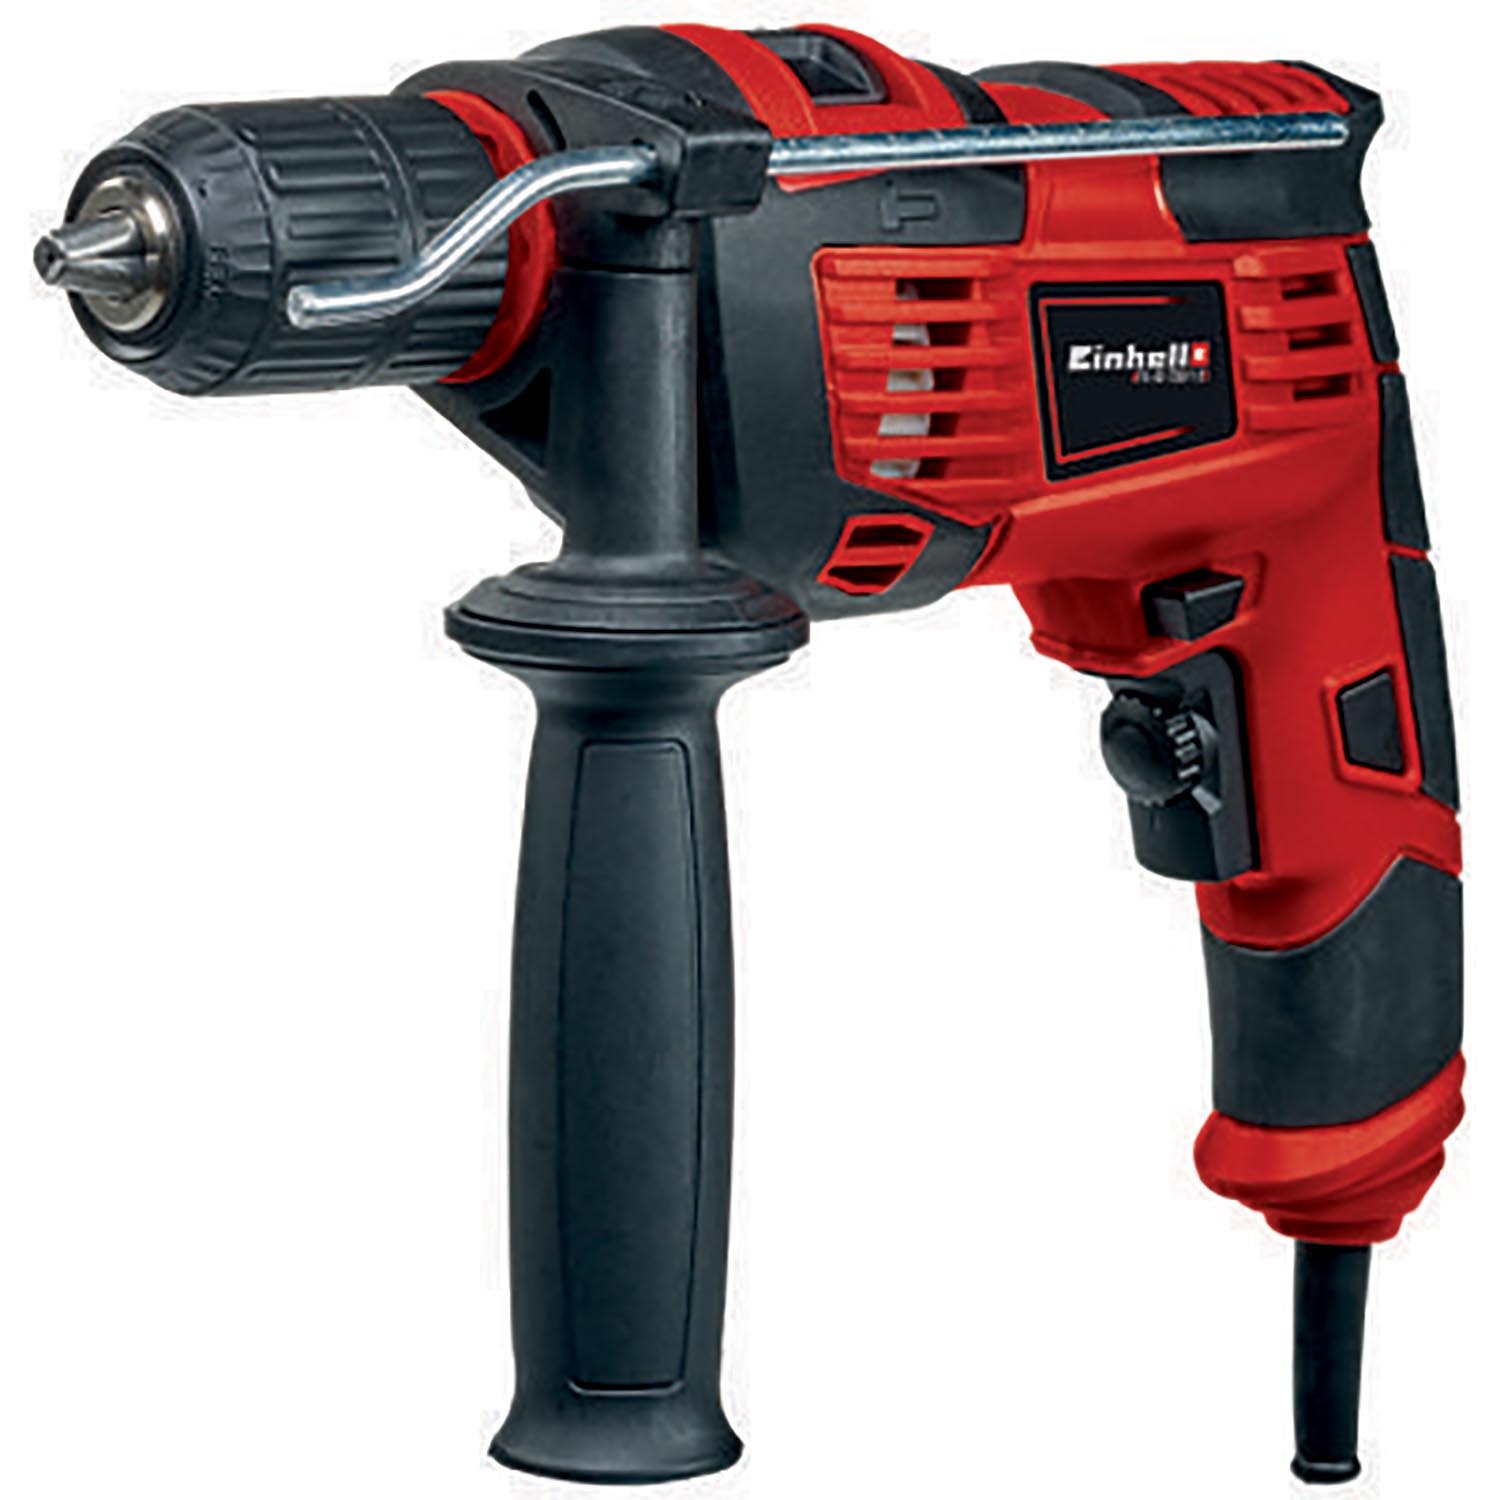 Einhell Impact Drill with Bit Set and Case Image 1